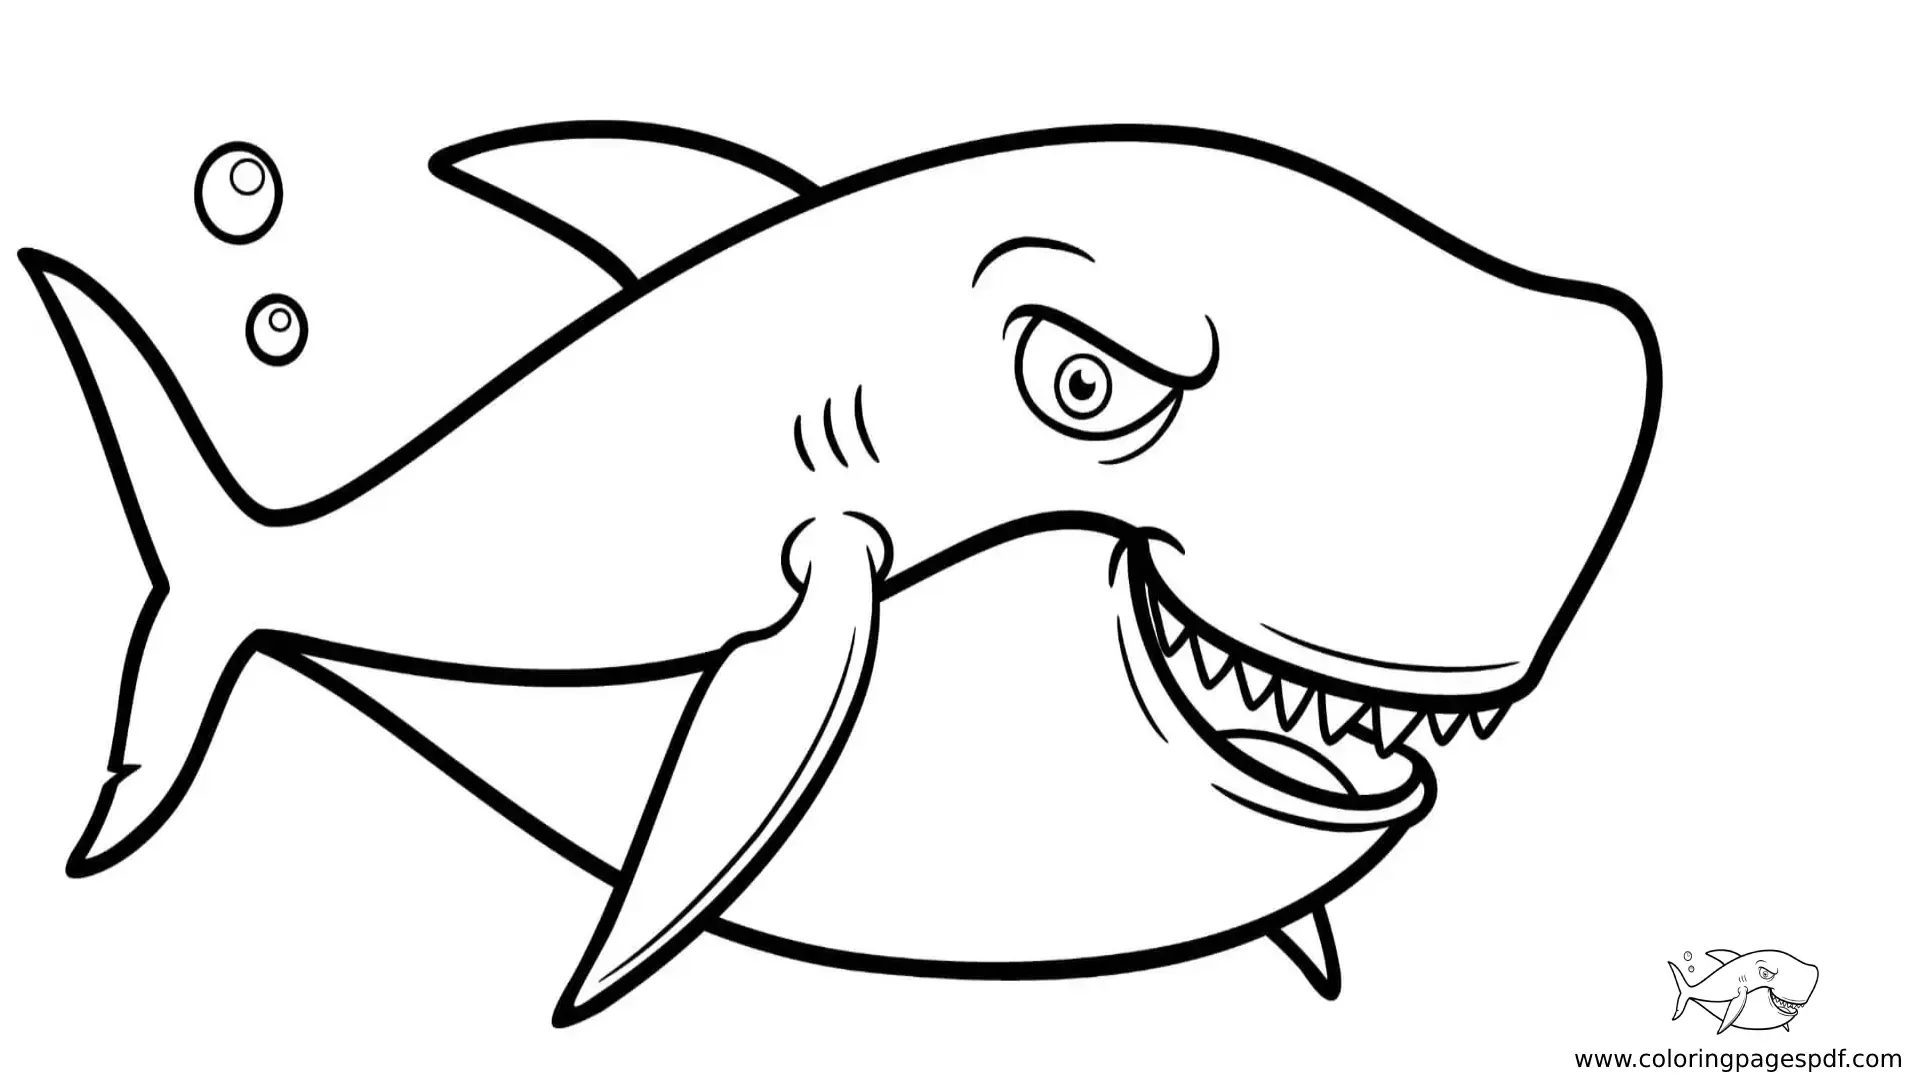 Coloring Pages Of A Shark With An Evil Smile